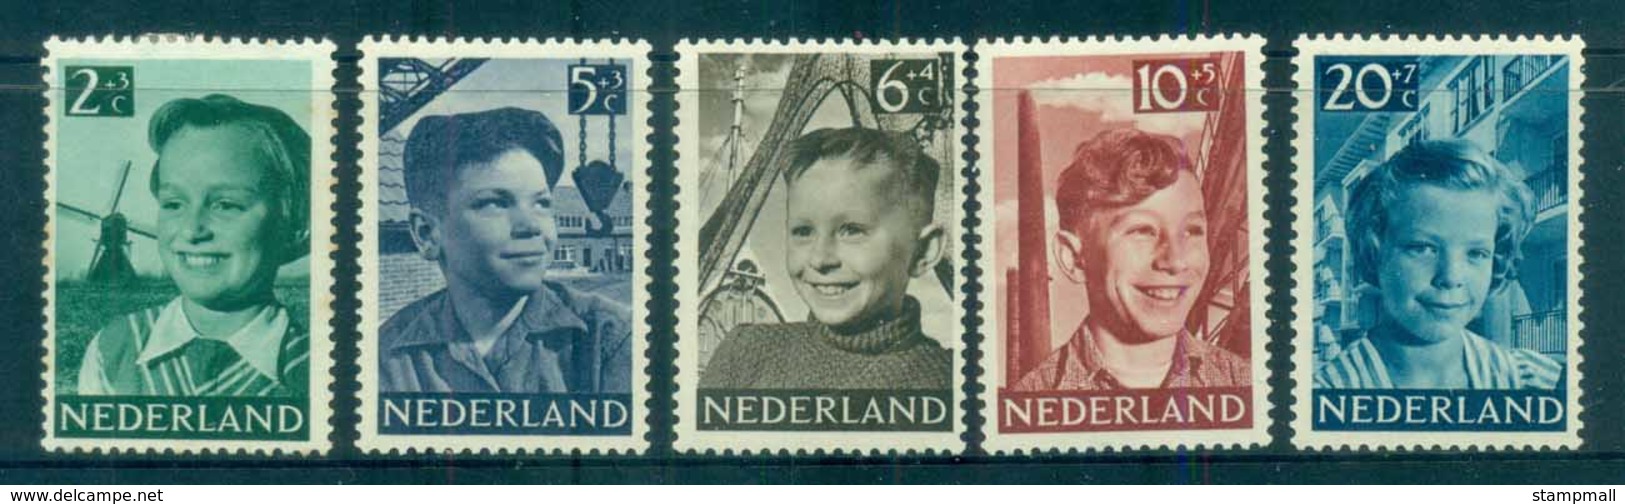 Netherlands 1951 Charity, Child Welfare MH Lot76493 - Unclassified